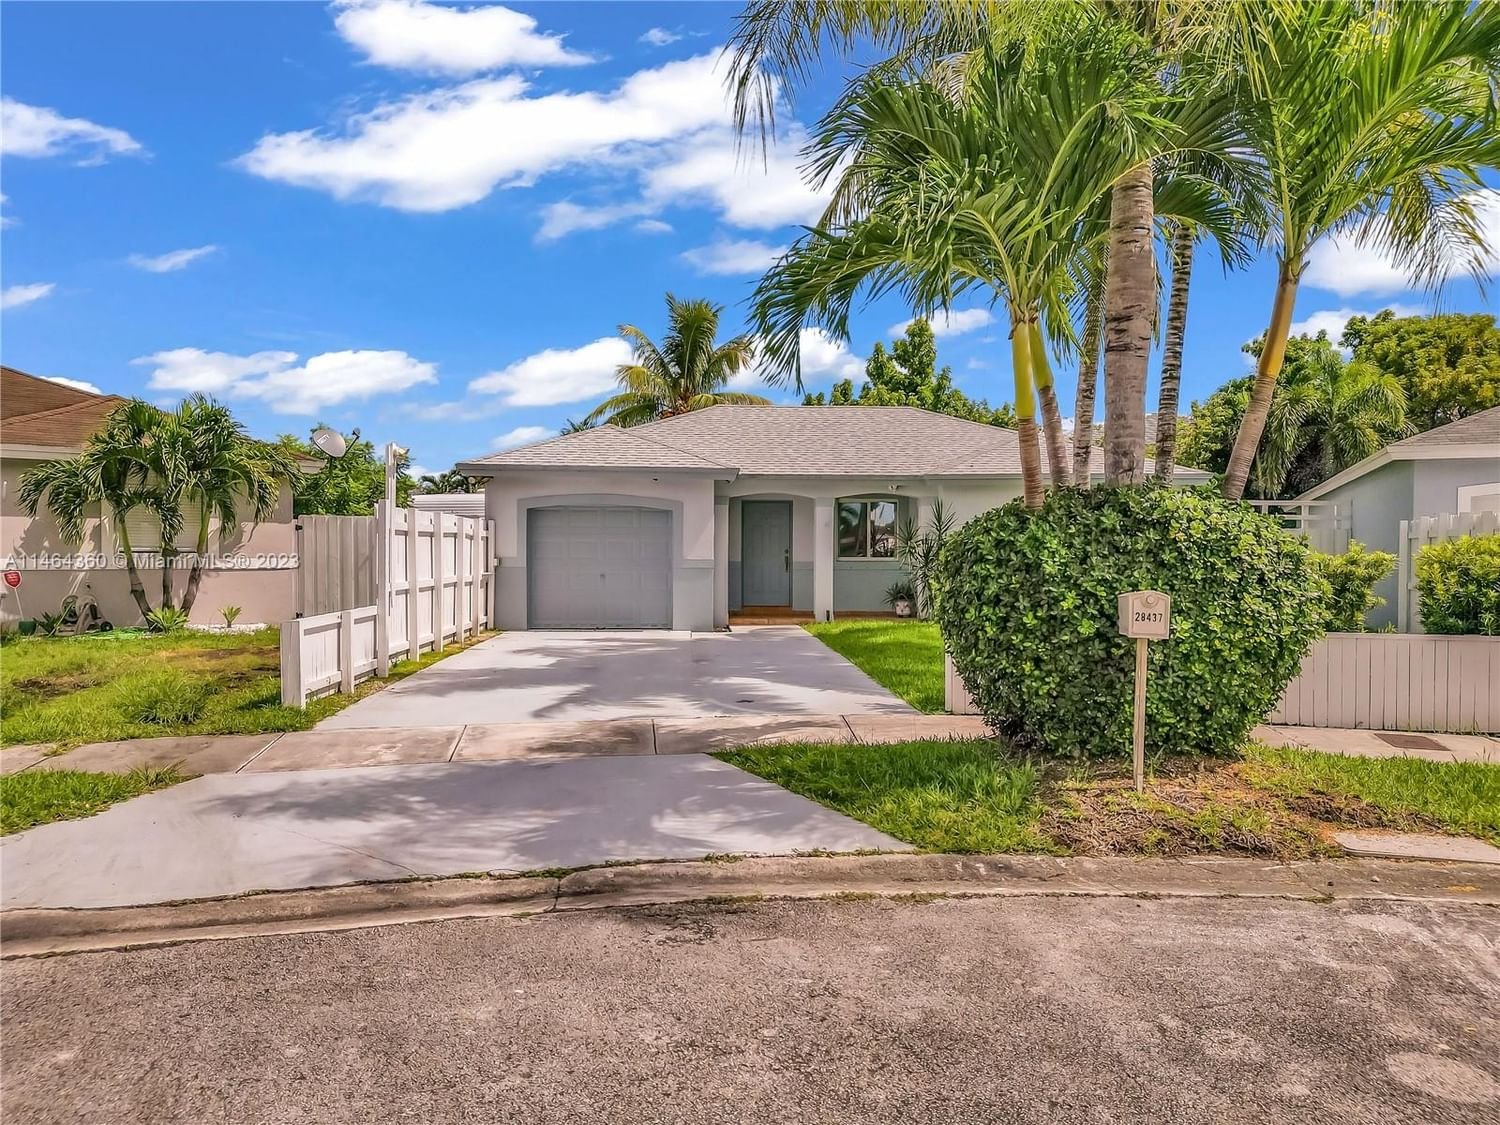 Real estate property located at 28437 135th Ave, Miami-Dade County, AMERIHOMES SEC 2, Homestead, FL